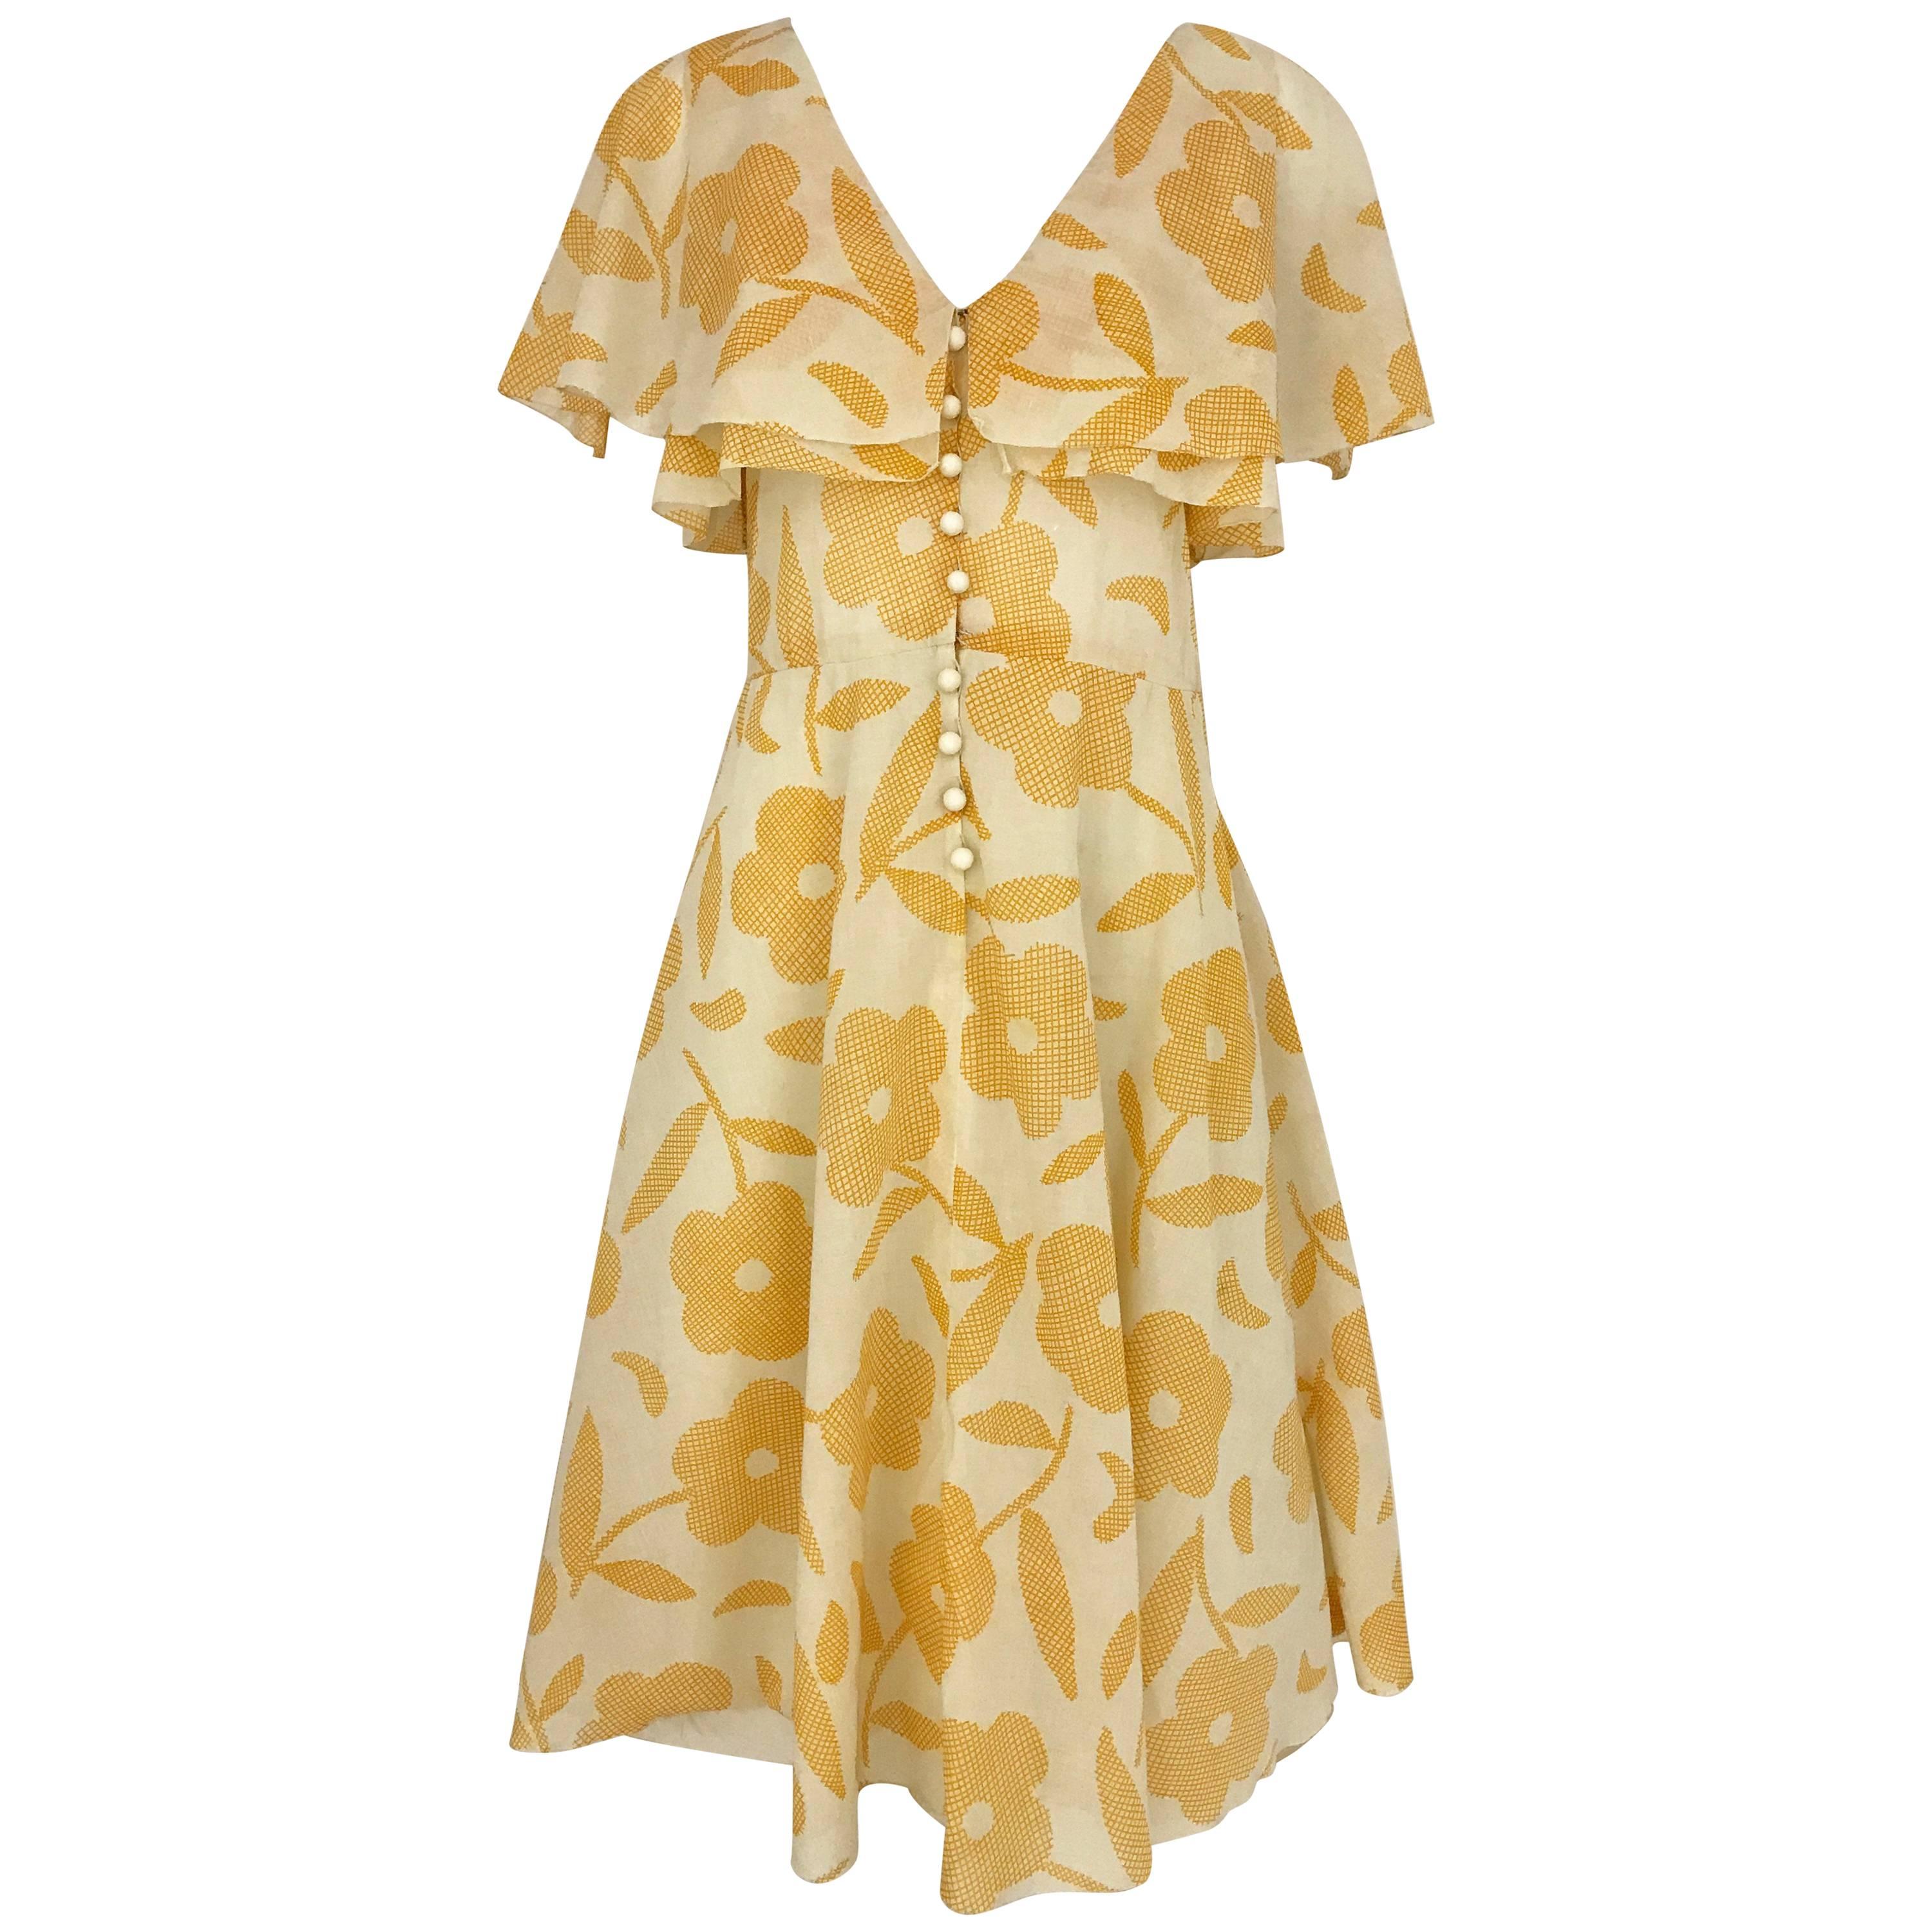 1990s CHLOE Yellow and Creme Floral Print Cotton Vintage 90s casual Dress